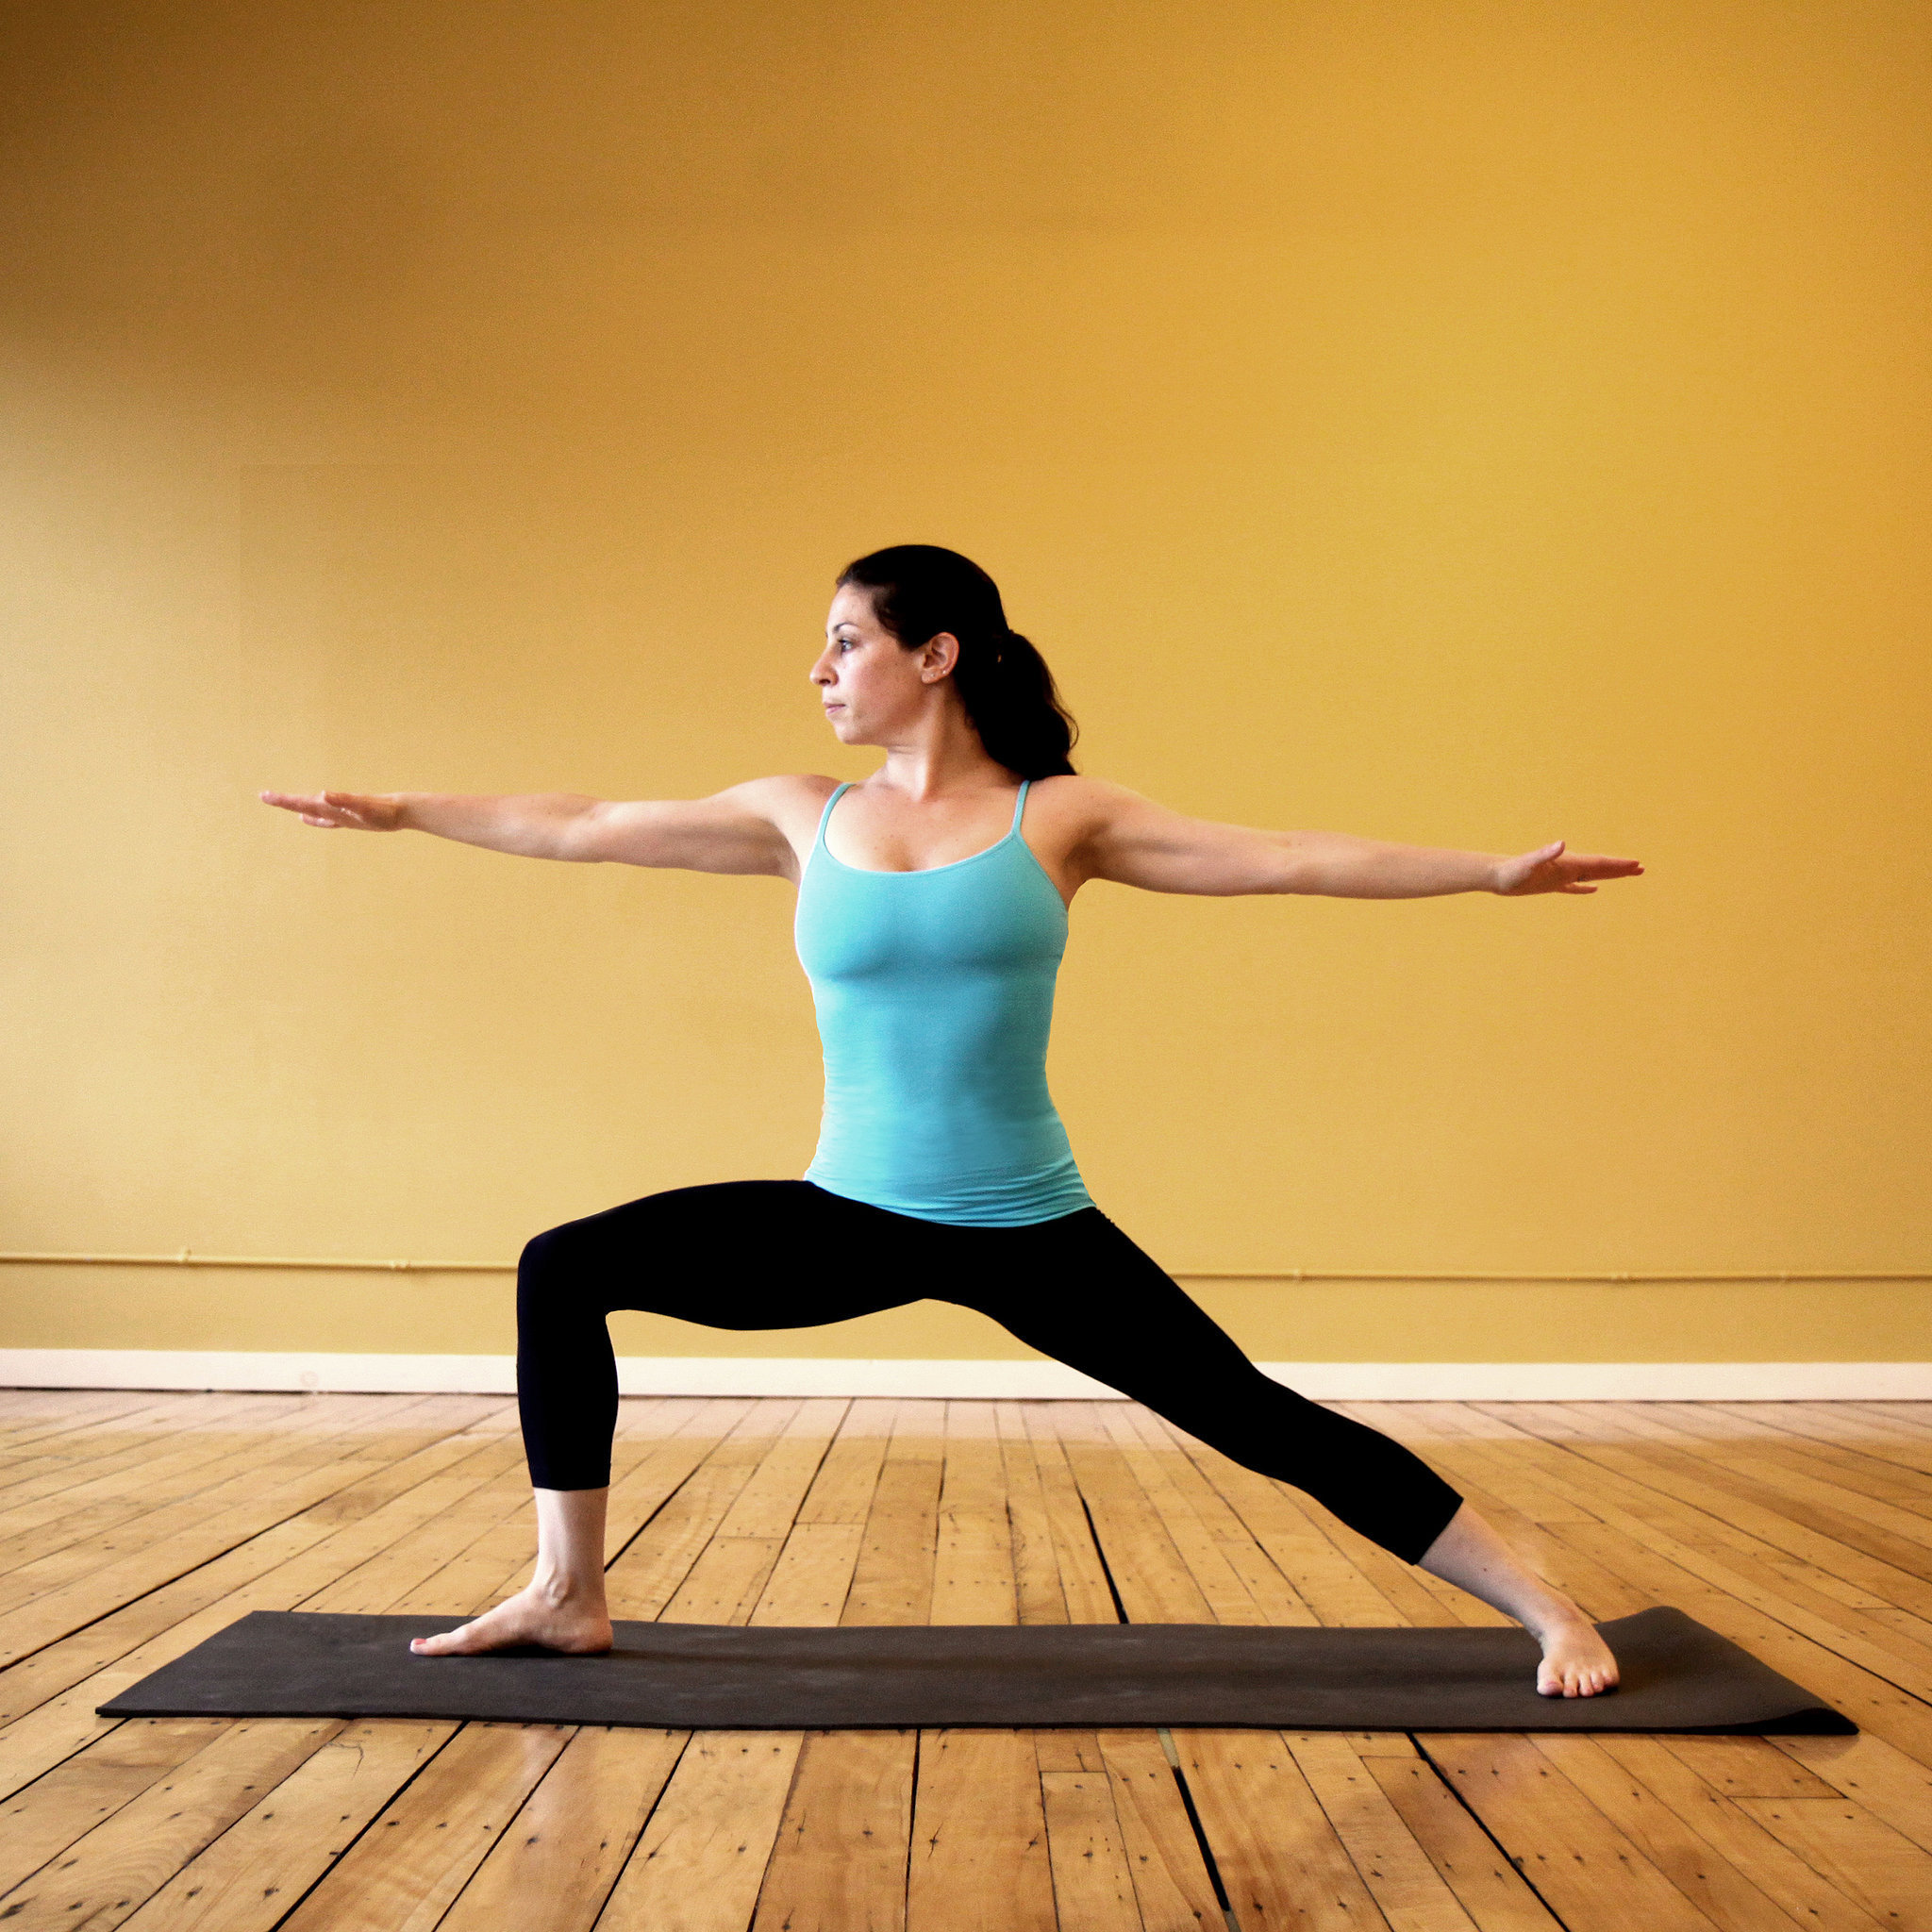 5 Beginner Yoga Poses to Try On Weed